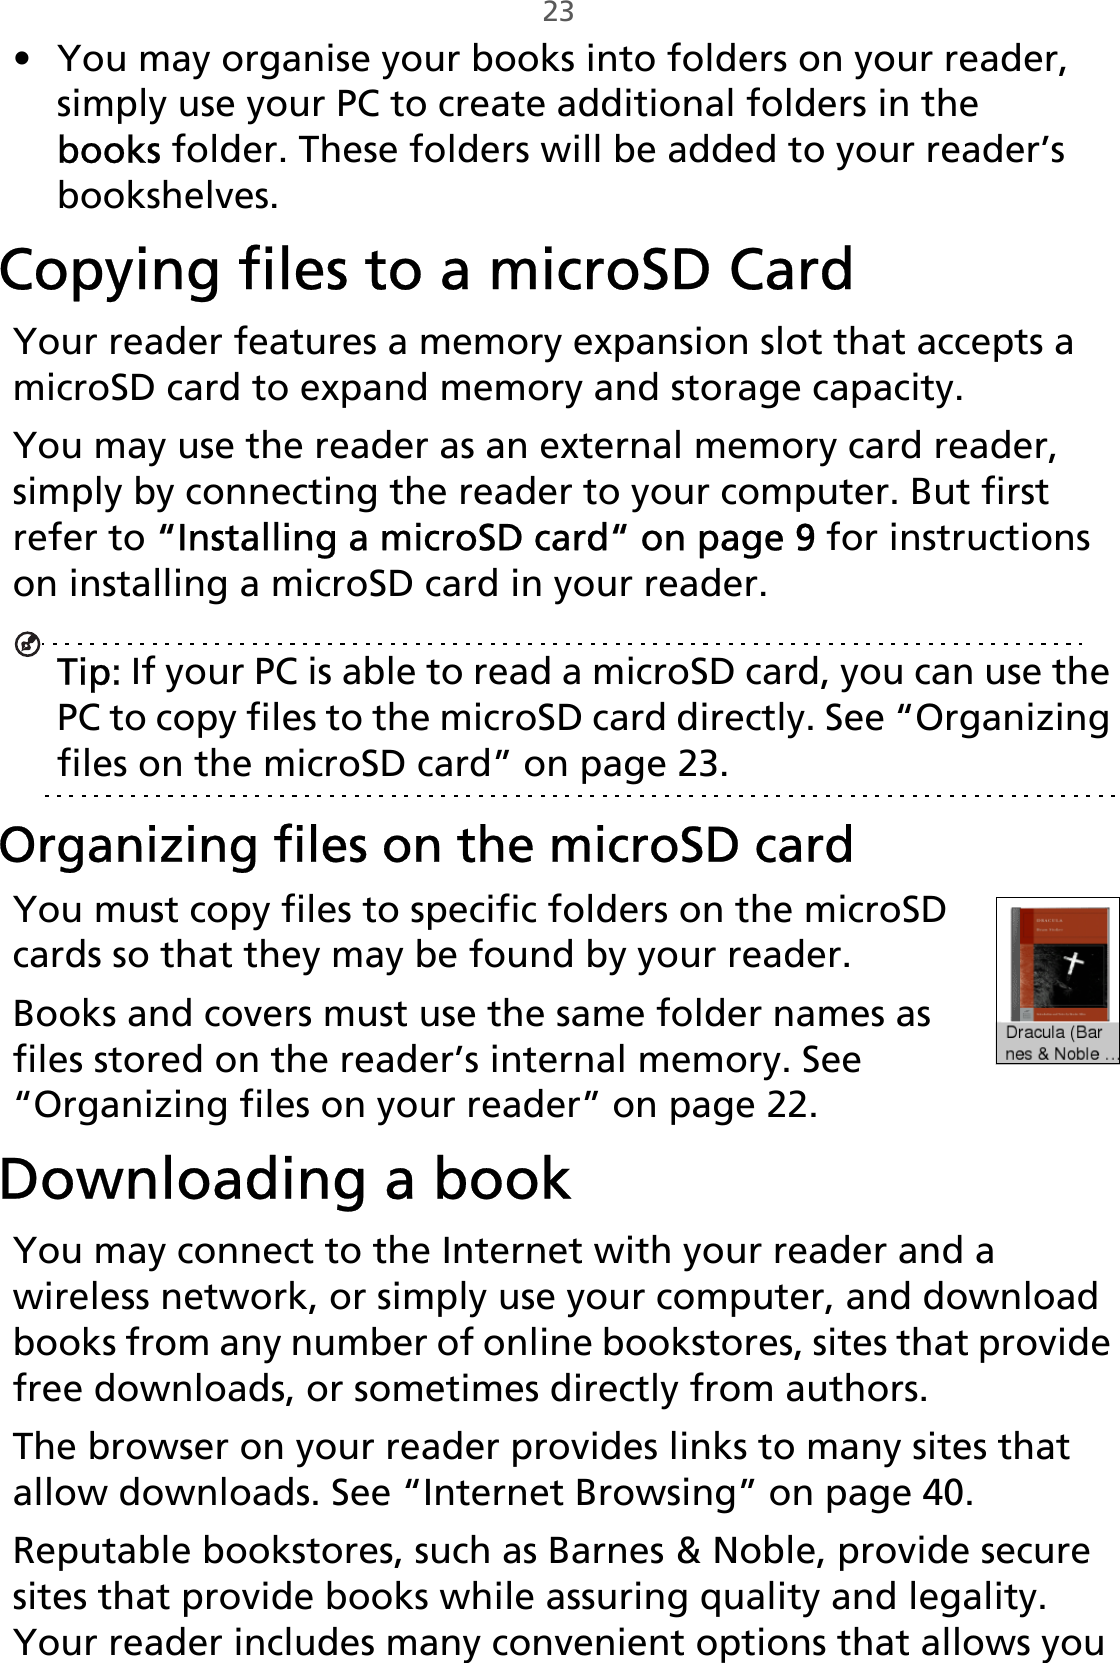 23• You may organise your books into folders on your reader, simply use your PC to create additional folders in the books folder. These folders will be added to your reader’s bookshelves.Copying files to a microSD CardYour reader features a memory expansion slot that accepts a microSD card to expand memory and storage capacity.You may use the reader as an external memory card reader, simply by connecting the reader to your computer. But first refer to “Installing a microSD card“ on page 9 for instructions on installing a microSD card in your reader.Tip: If your PC is able to read a microSD card, you can use the PC to copy files to the microSD card directly. See “Organizing files on the microSD card” on page 23.Organizing files on the microSD cardYou must copy files to specific folders on the microSD cards so that they may be found by your reader.Books and covers must use the same folder names as files stored on the reader’s internal memory. See “Organizing files on your reader” on page 22.Downloading a bookYou may connect to the Internet with your reader and a wireless network, or simply use your computer, and download books from any number of online bookstores, sites that provide free downloads, or sometimes directly from authors.The browser on your reader provides links to many sites that allow downloads. See “Internet Browsing” on page 40.Reputable bookstores, such as Barnes &amp; Noble, provide secure sites that provide books while assuring quality and legality. Your reader includes many convenient options that allows you 